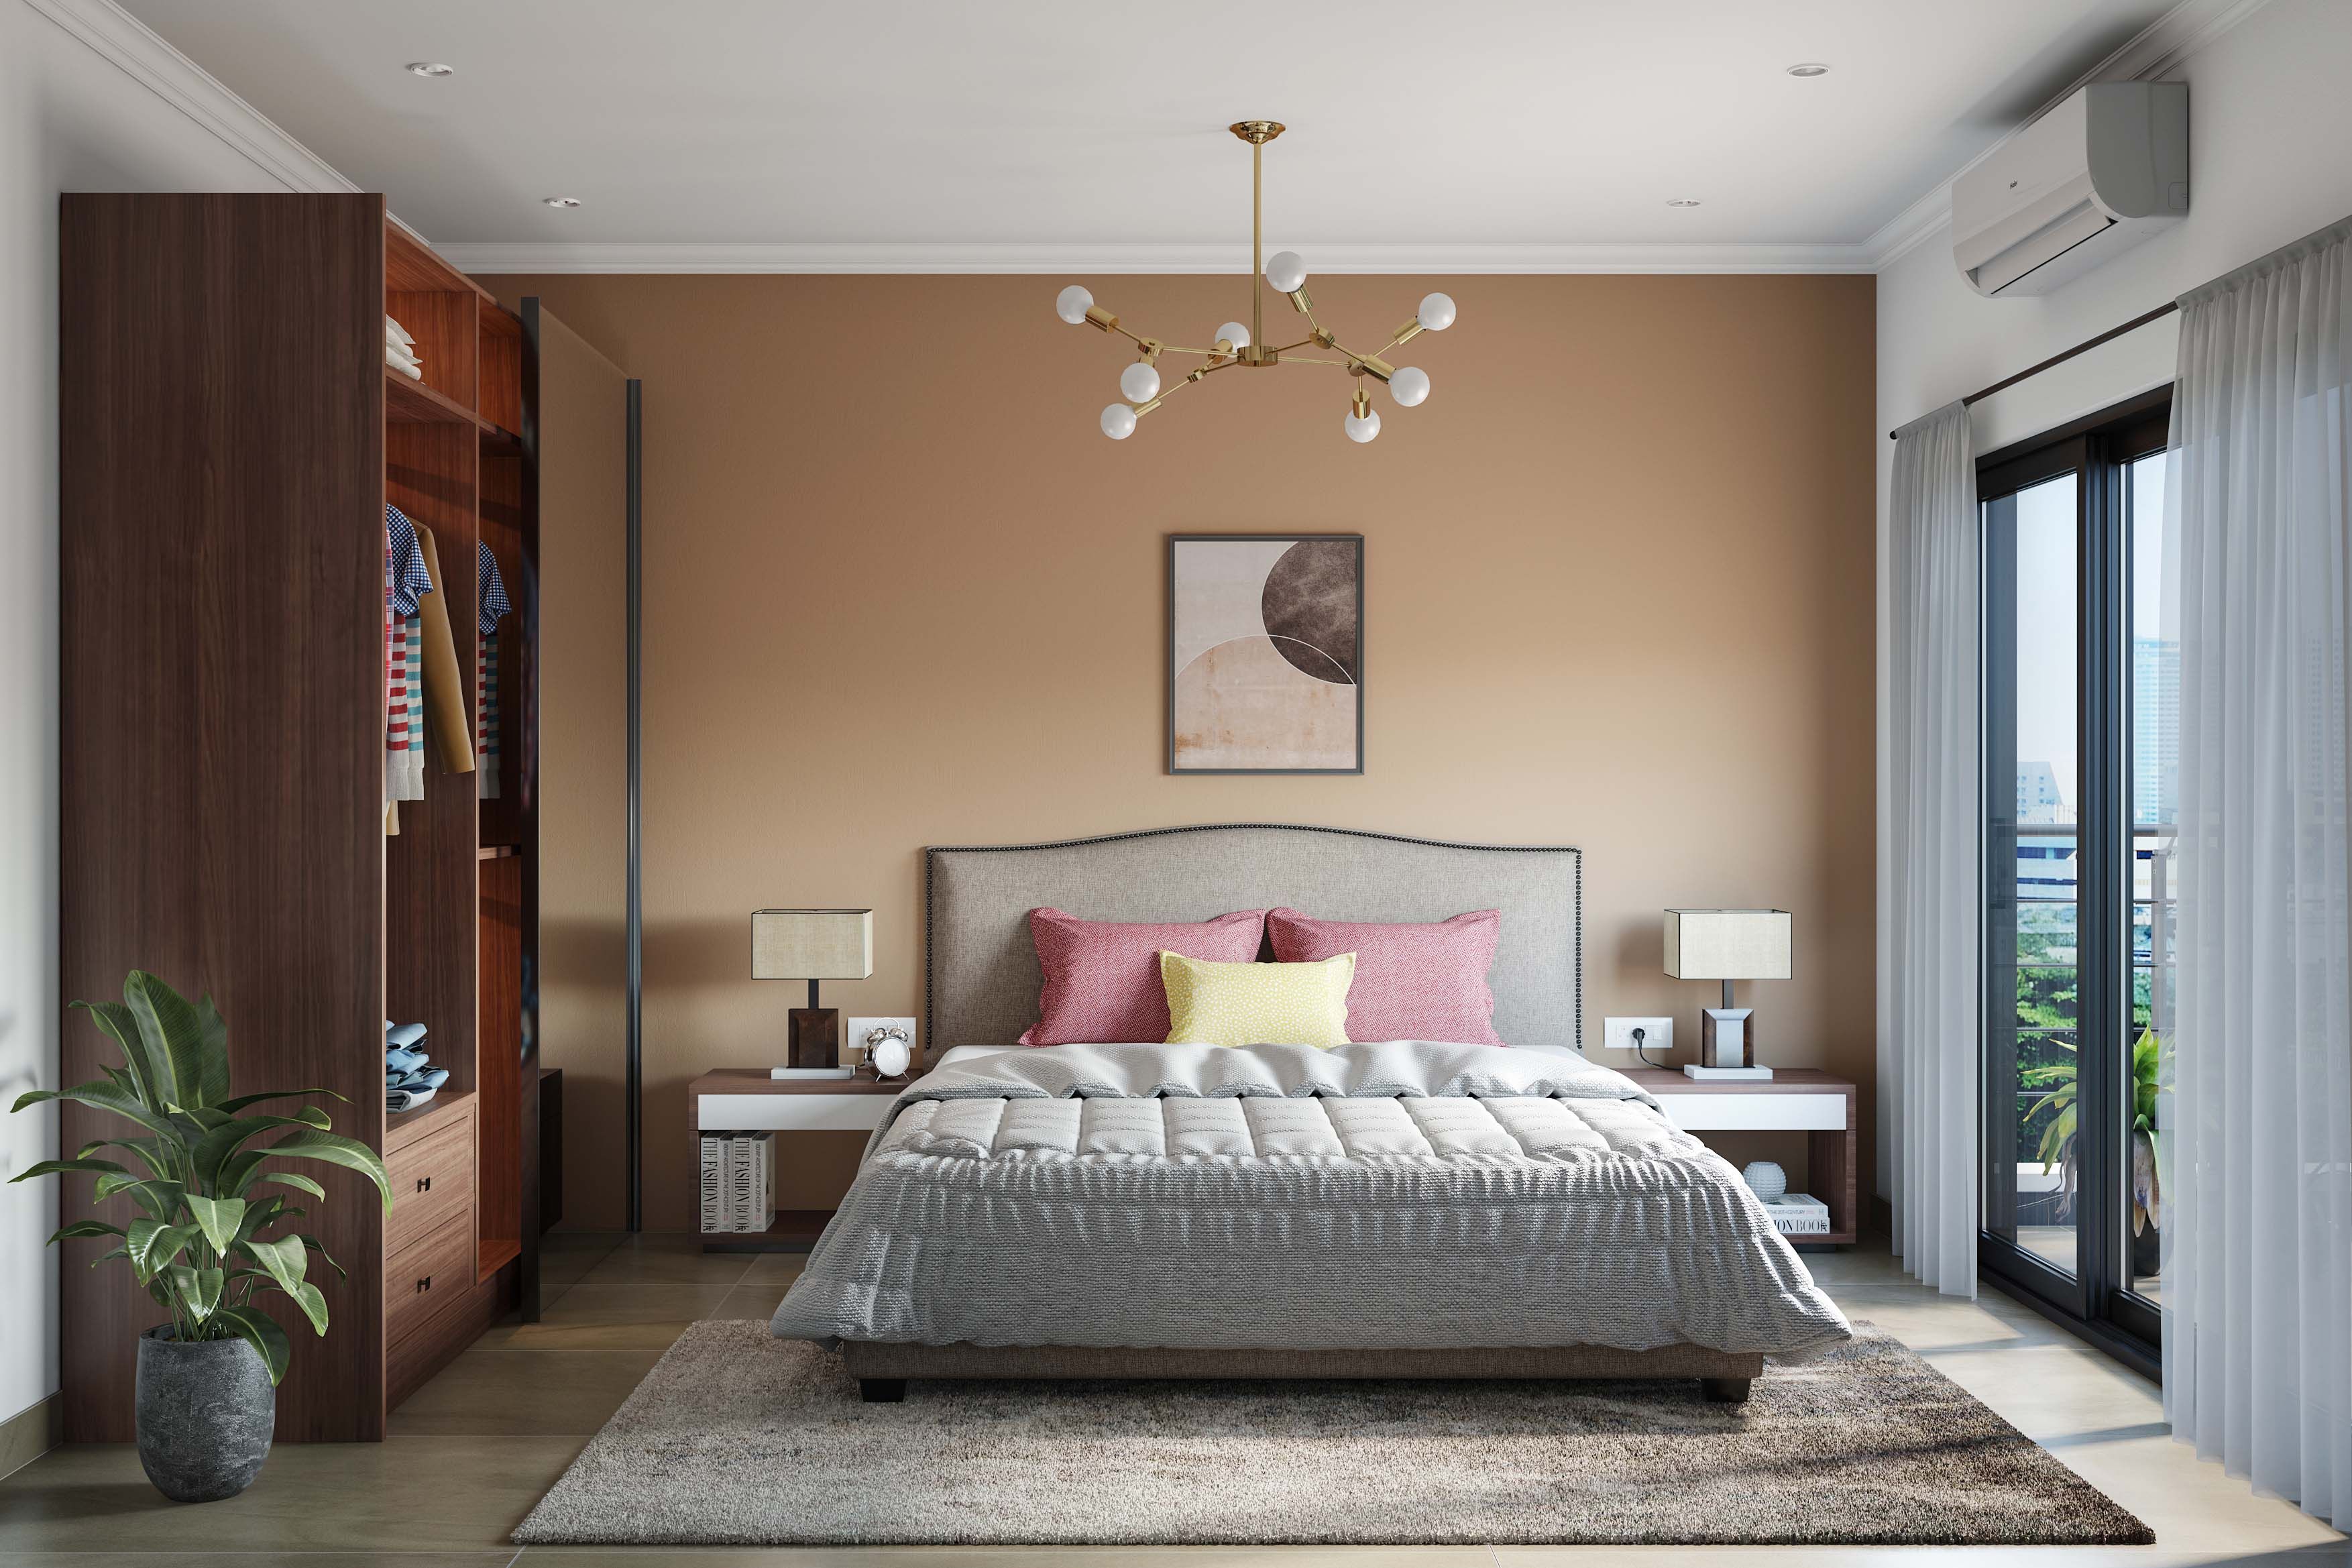 Modern Master Bedroom Design With Beige Upholstered Bed And Light Brown Wall Paint